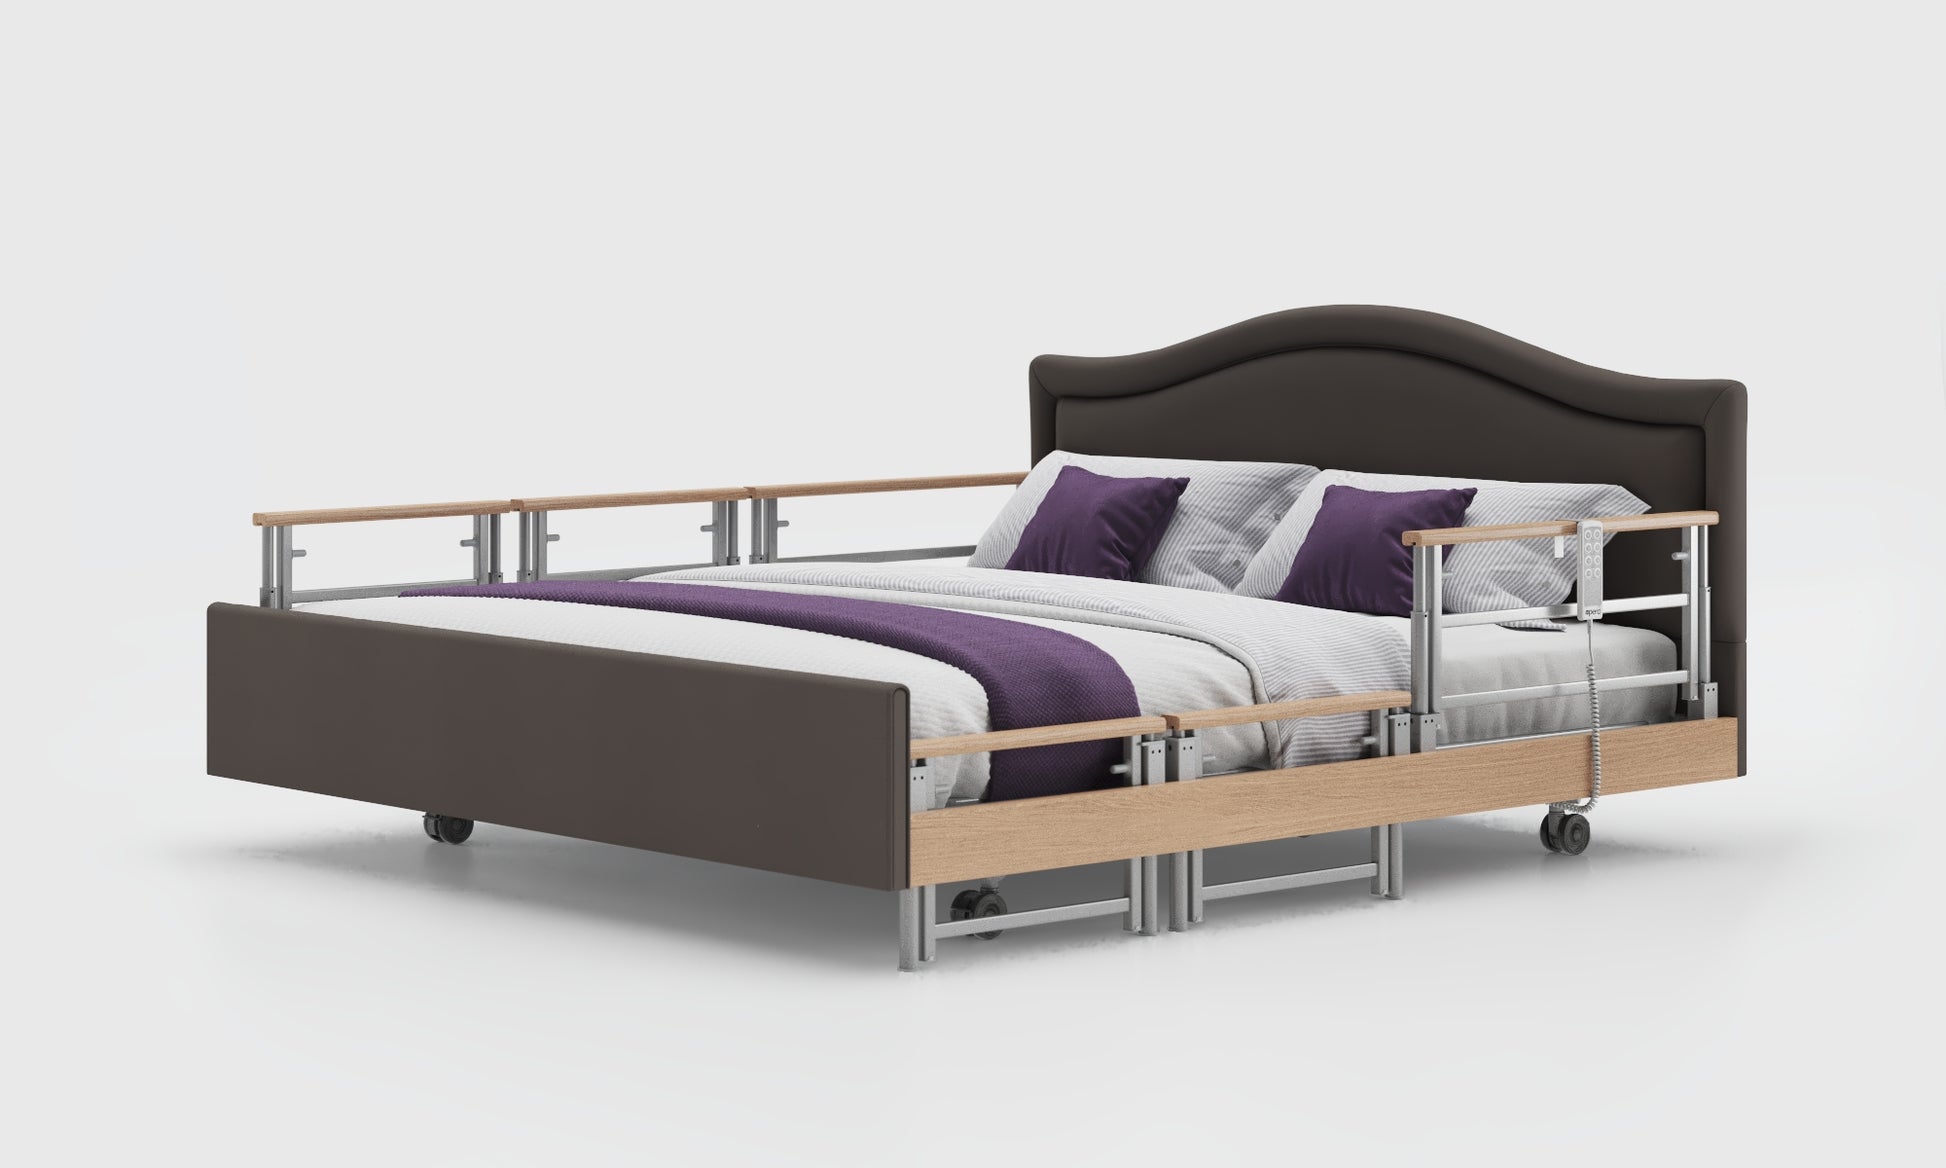 Signature comfort 6ft bed with oak tri rails and pearl headboard in meteor leather